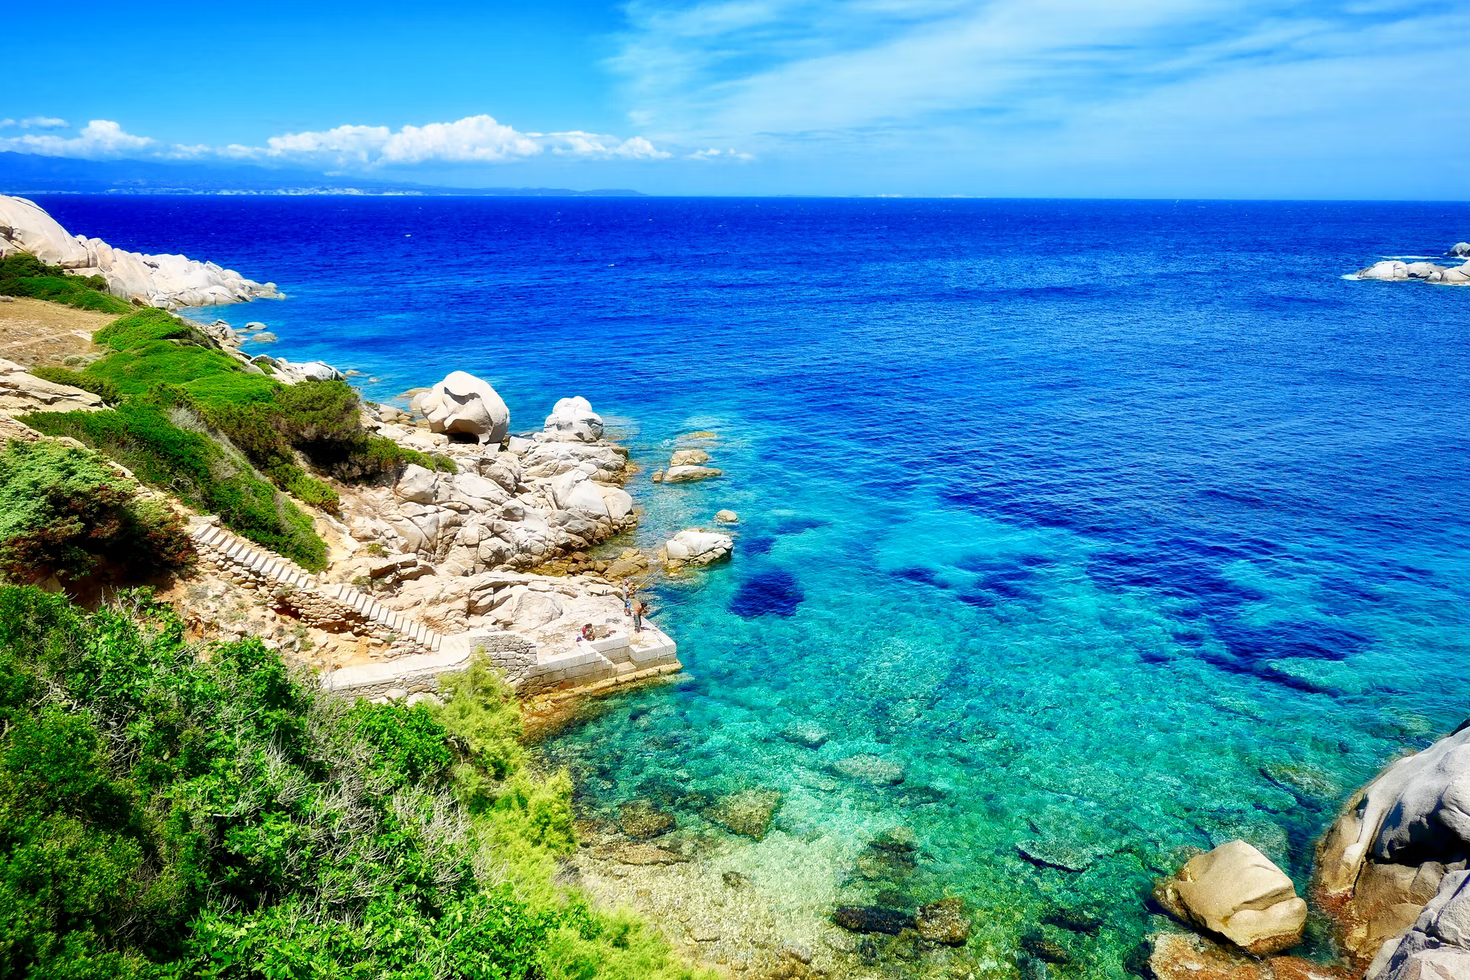 8 Reasons Why Sardinia Should Be Next in Your Holiday Plans